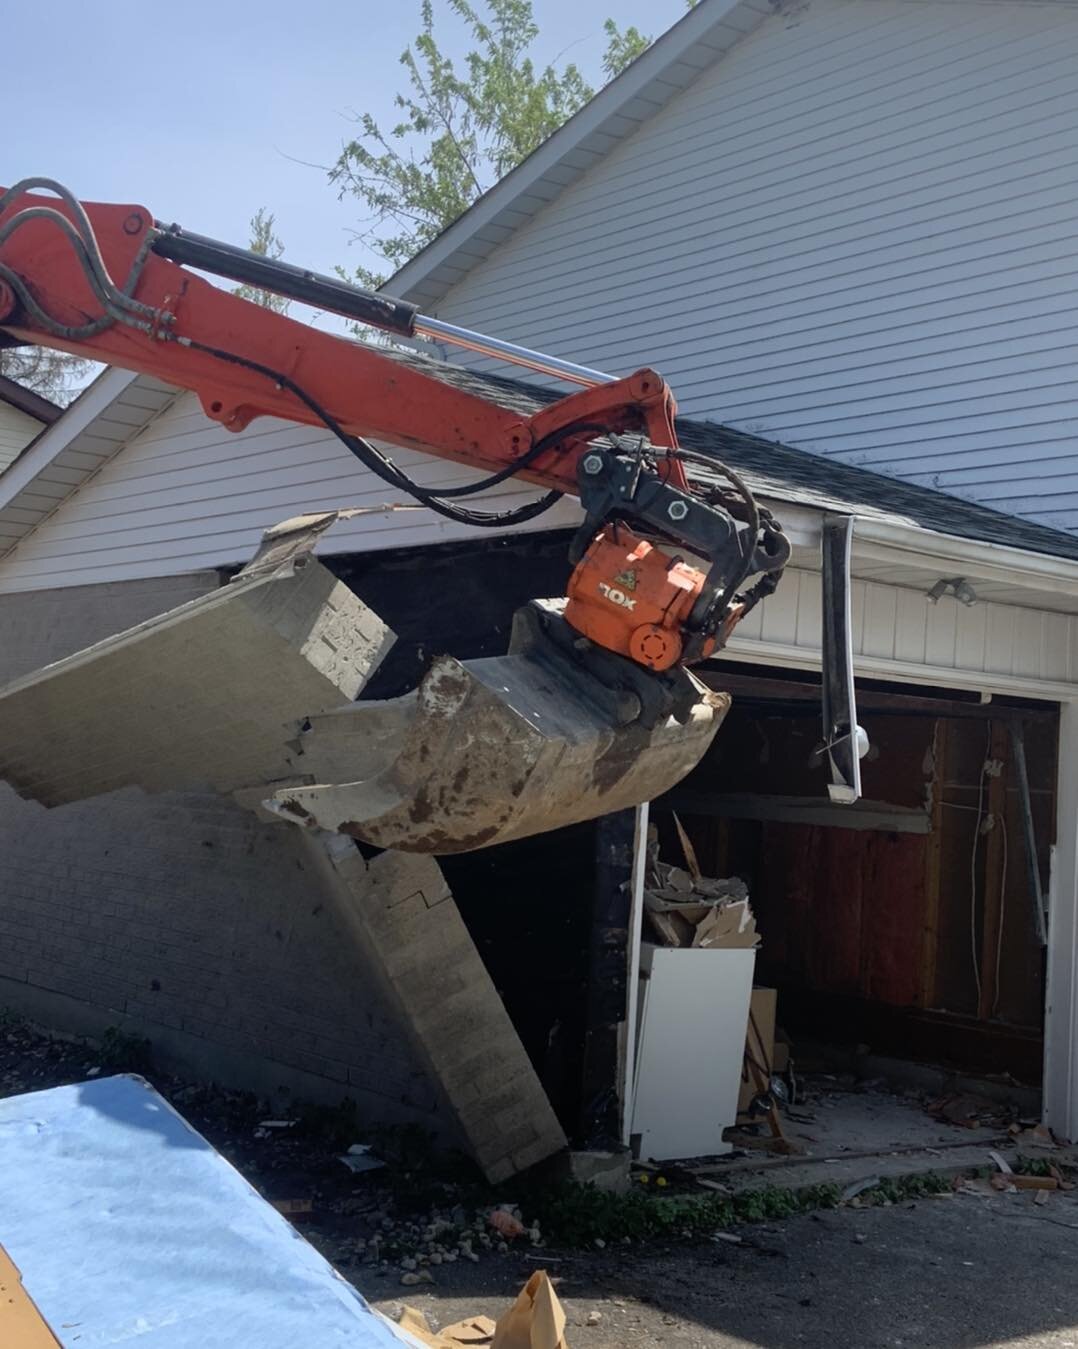 Back from vacation and hit the ground running.
Day one of an addition project in Guelph: Electrical service disconnect, re-work electrical feeds, gut a basement bathroom and kitchenette, demolish the garage.
I think thats enough for one day!